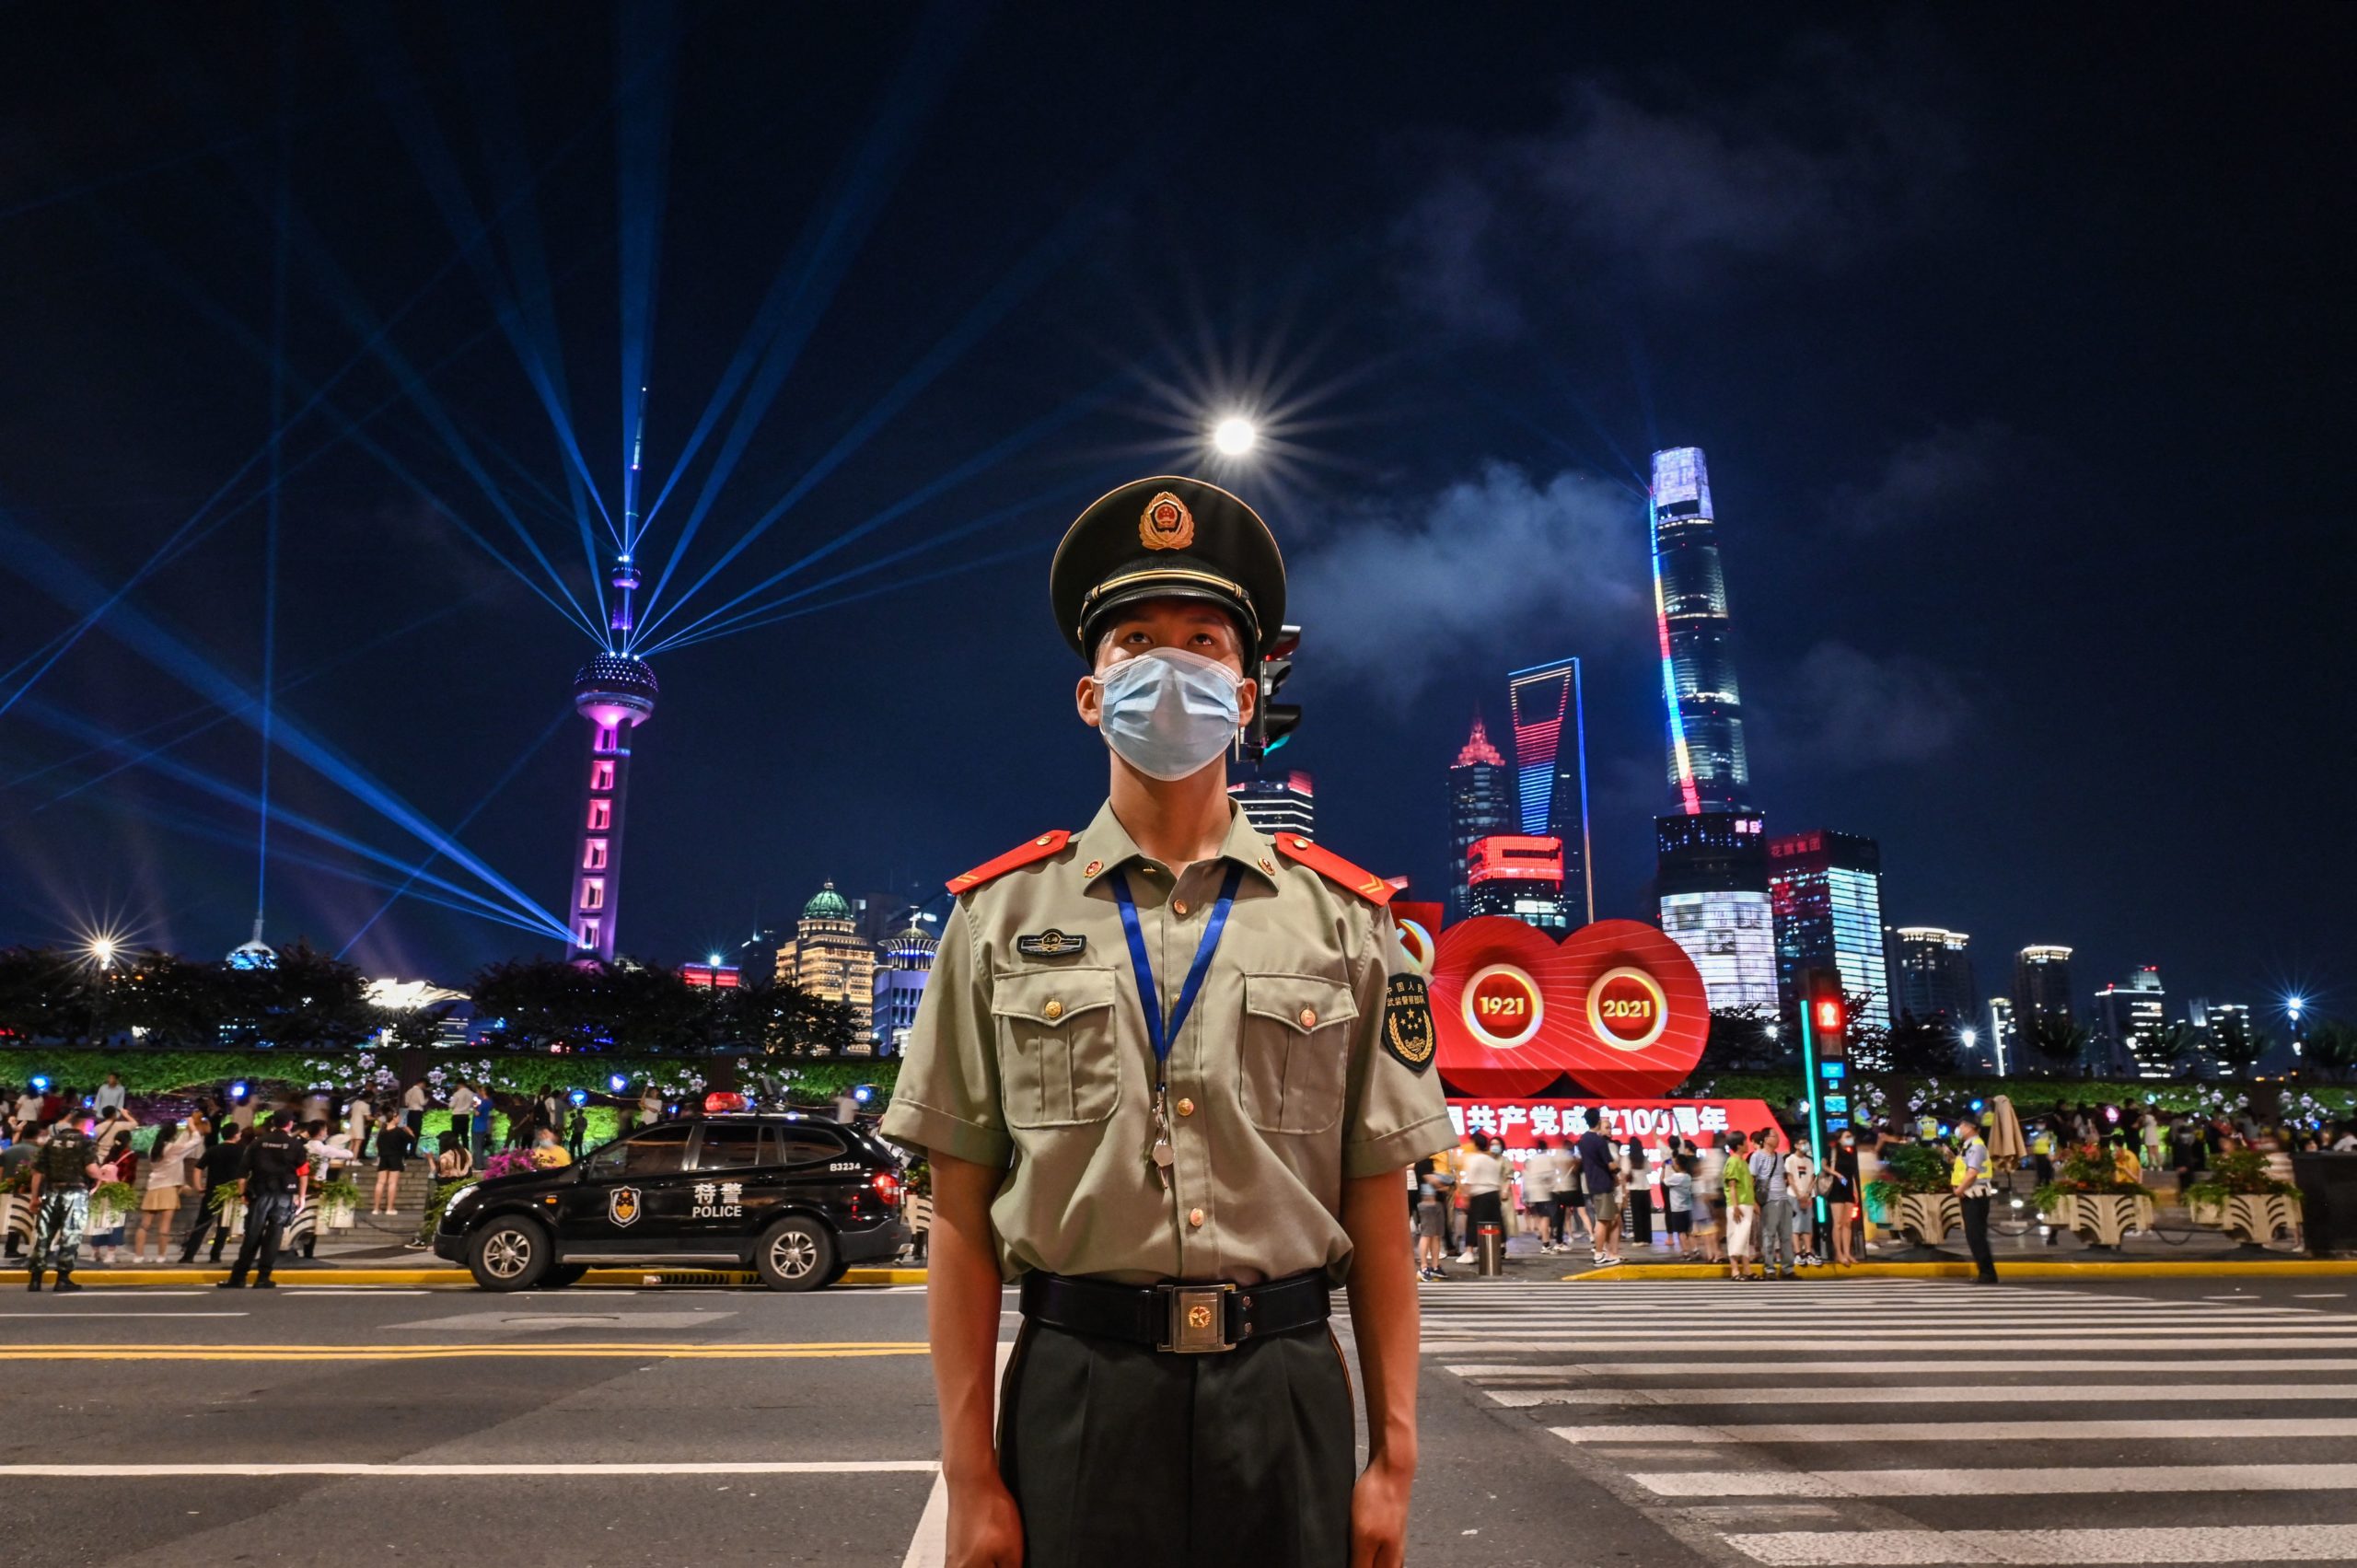 A Chinese paramilitary police stands guard while a light show is seen from the Bund in Shanghai on June 30, 2021, on the eve of the 100th anniversary of the Chinese Communist Party. (Photo by HECTOR RETAMAL/AFP via Getty Images)